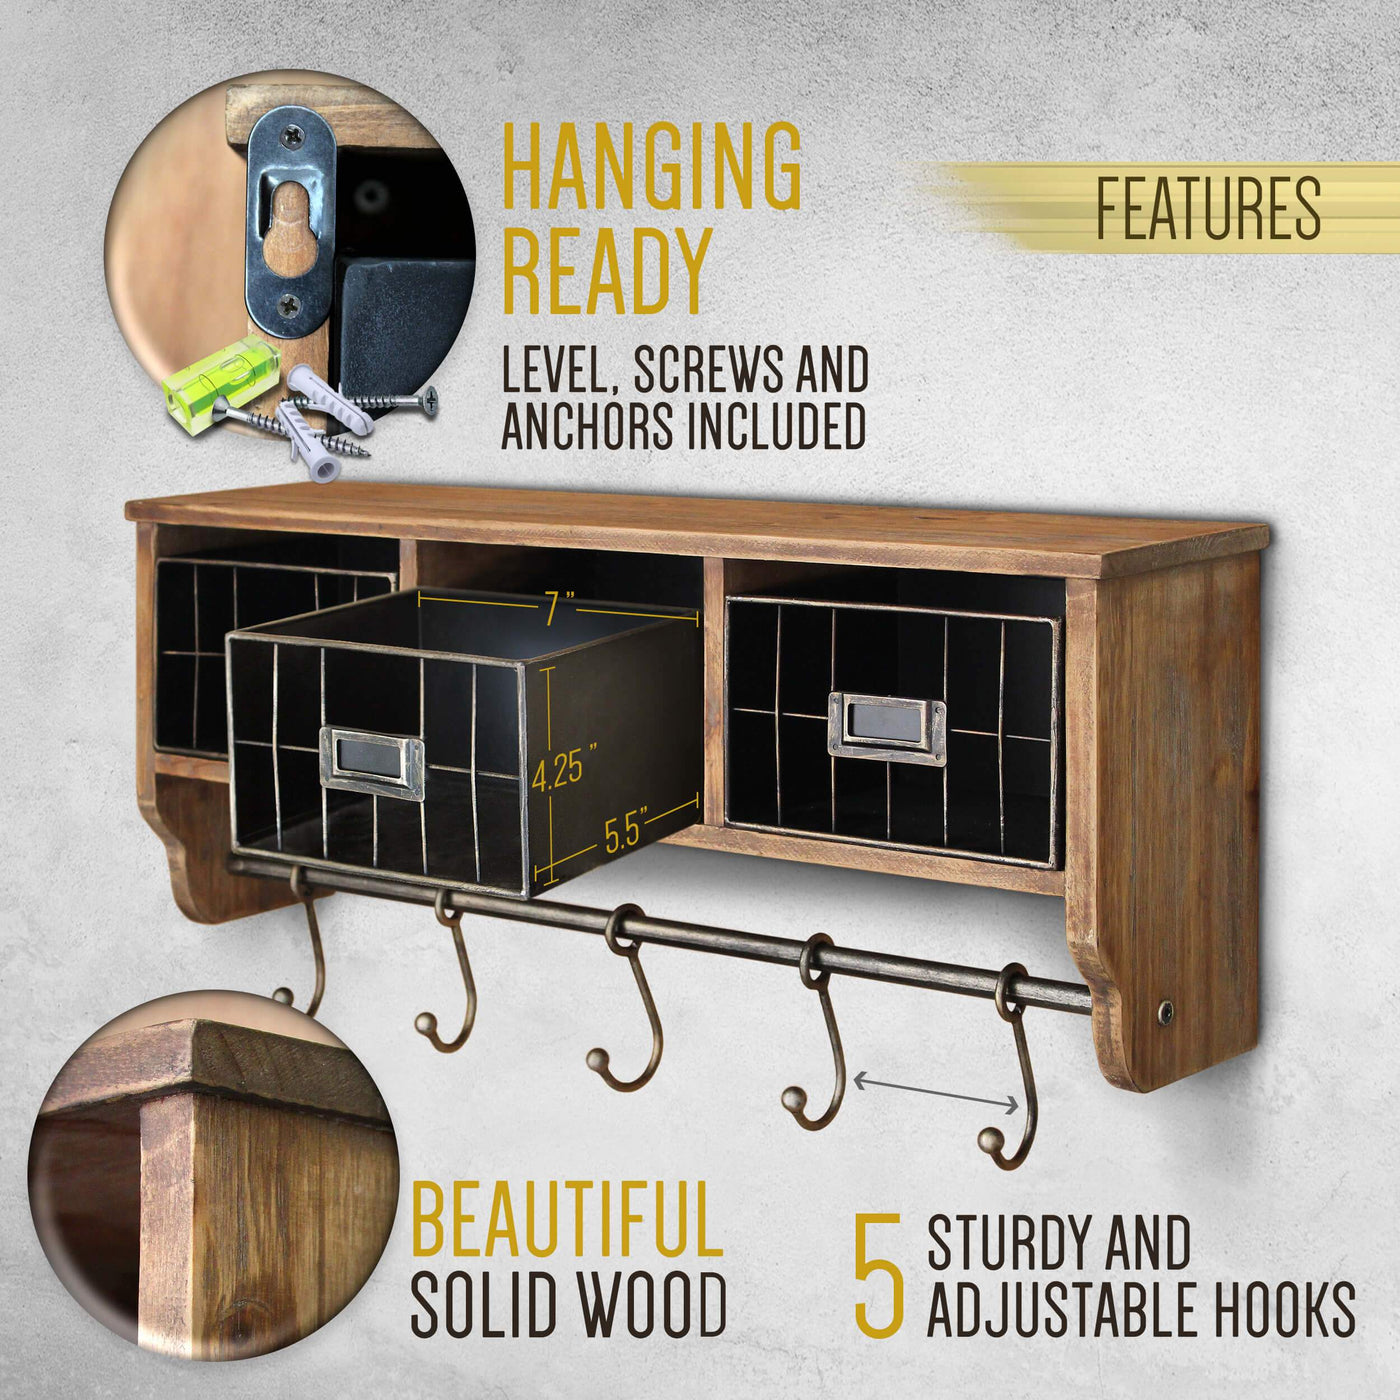 24 Rustic Wall Mounted Coat Rack With Shelf & 3 Baskets - Entryway Sh –  hbcycreations